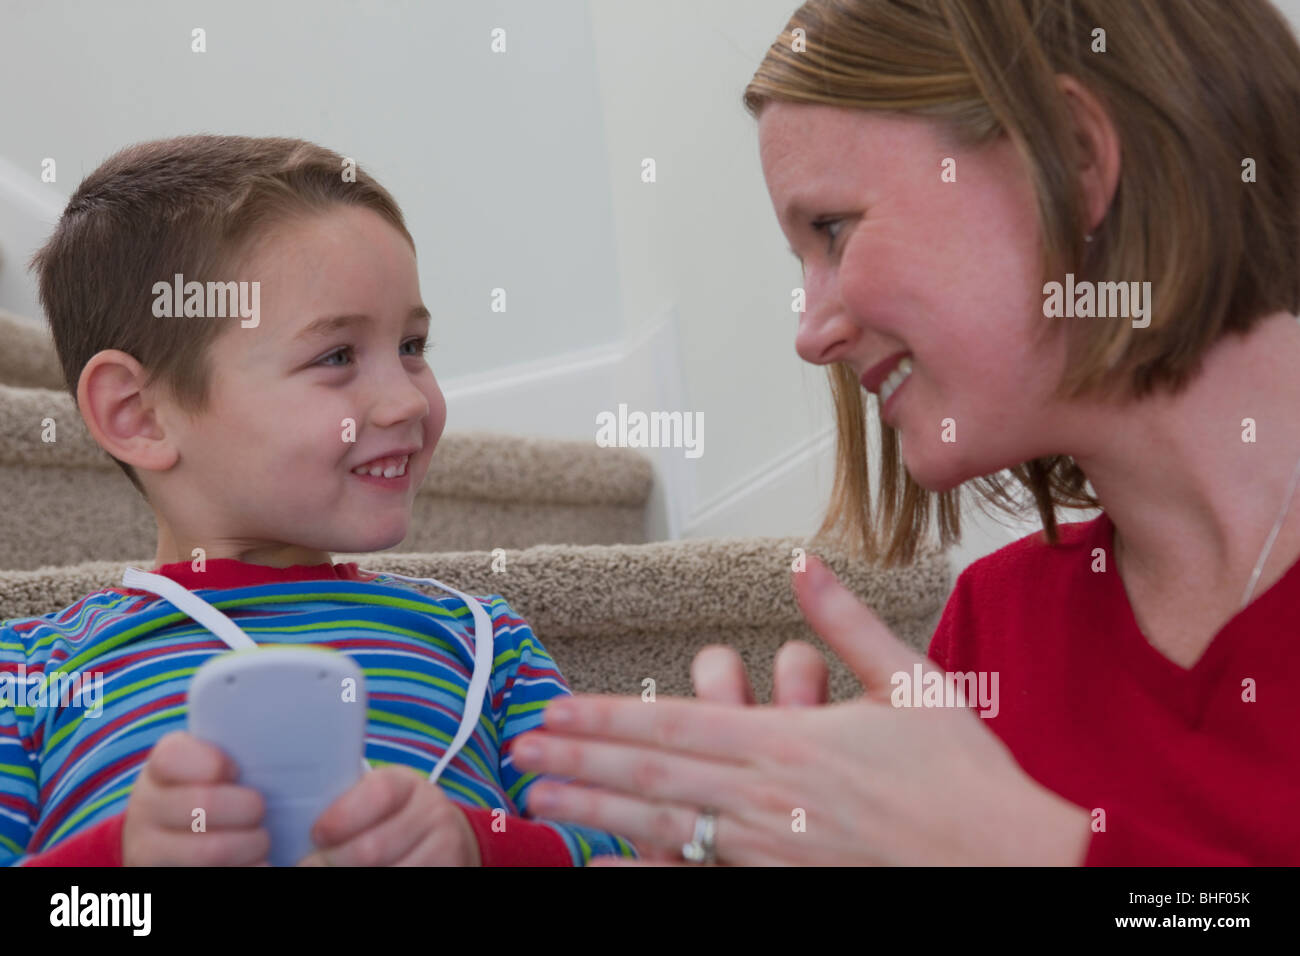 Woman signing the word 'Calculator' in American Sign Language while communicating with her son Stock Photo